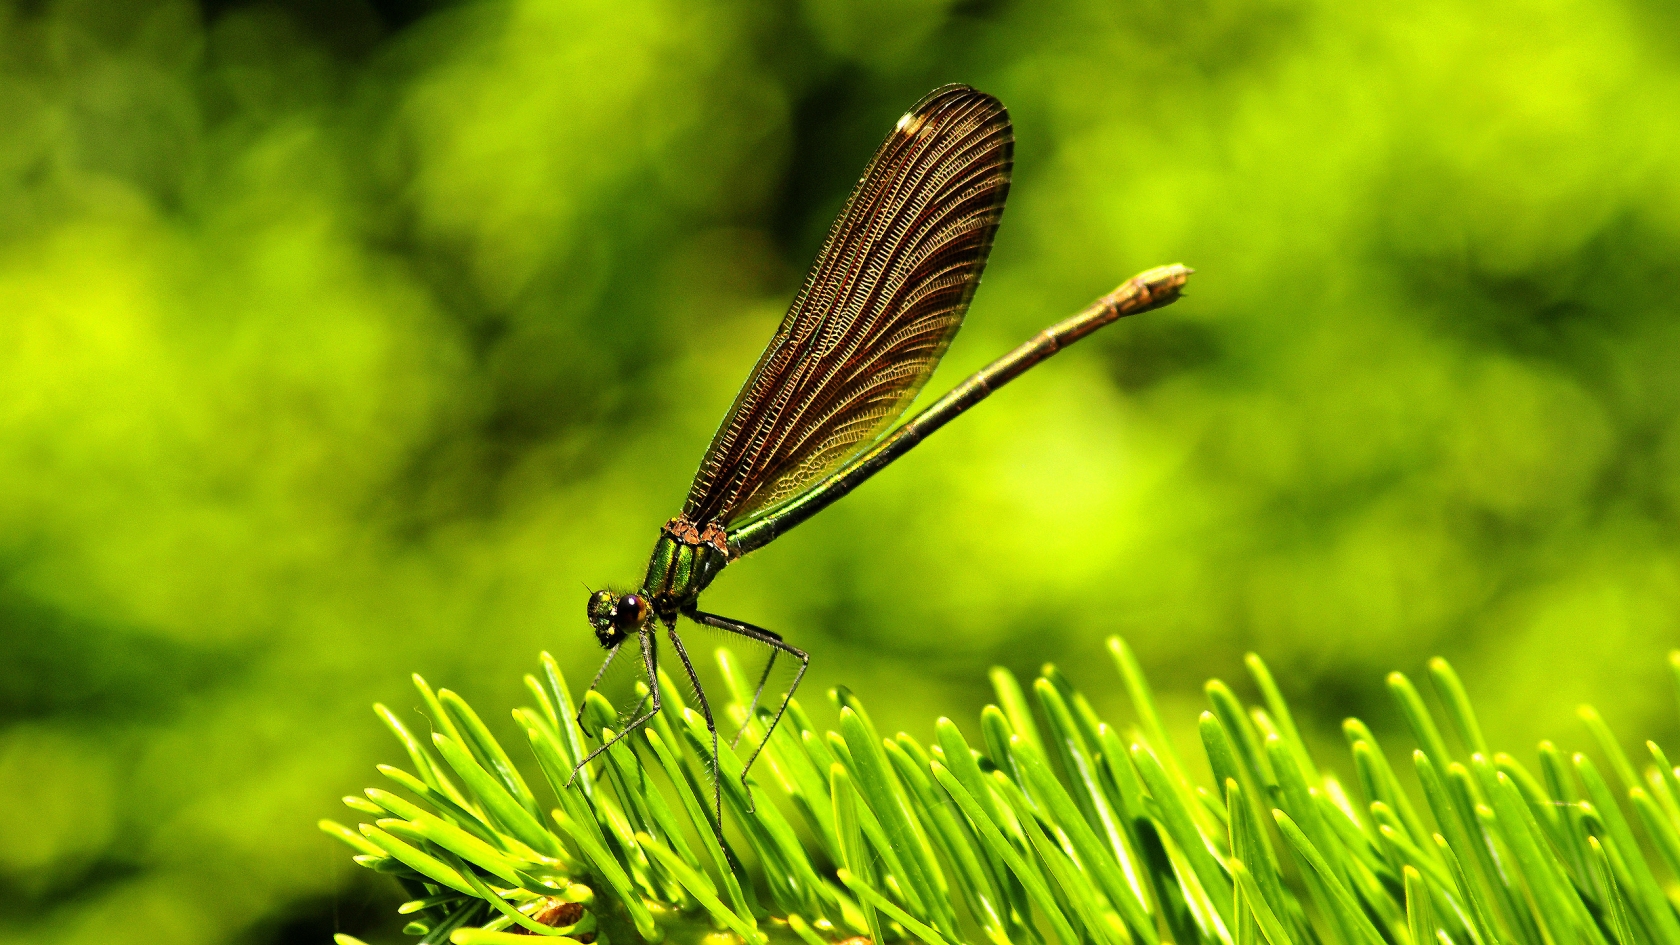 Amazing Dragon Fly for 1680 x 945 HDTV resolution